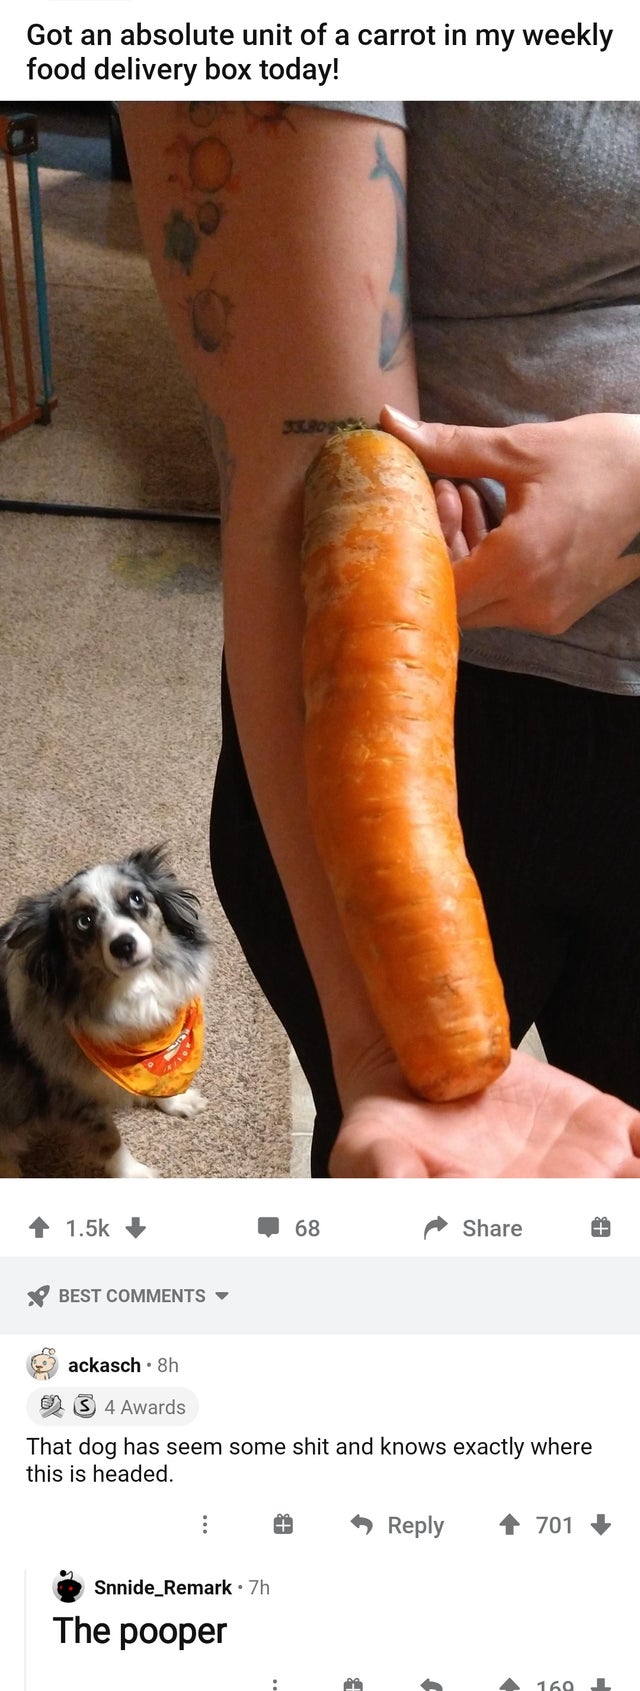 photo caption - Got an absolute unit of a carrot in my weekly food delivery box today! Bog 68 Best ackasch. 8h S 4 Awards That dog has seem some shit and knows exactly where this is headed. 701 Snnide_Remark. 7h The pooper 160